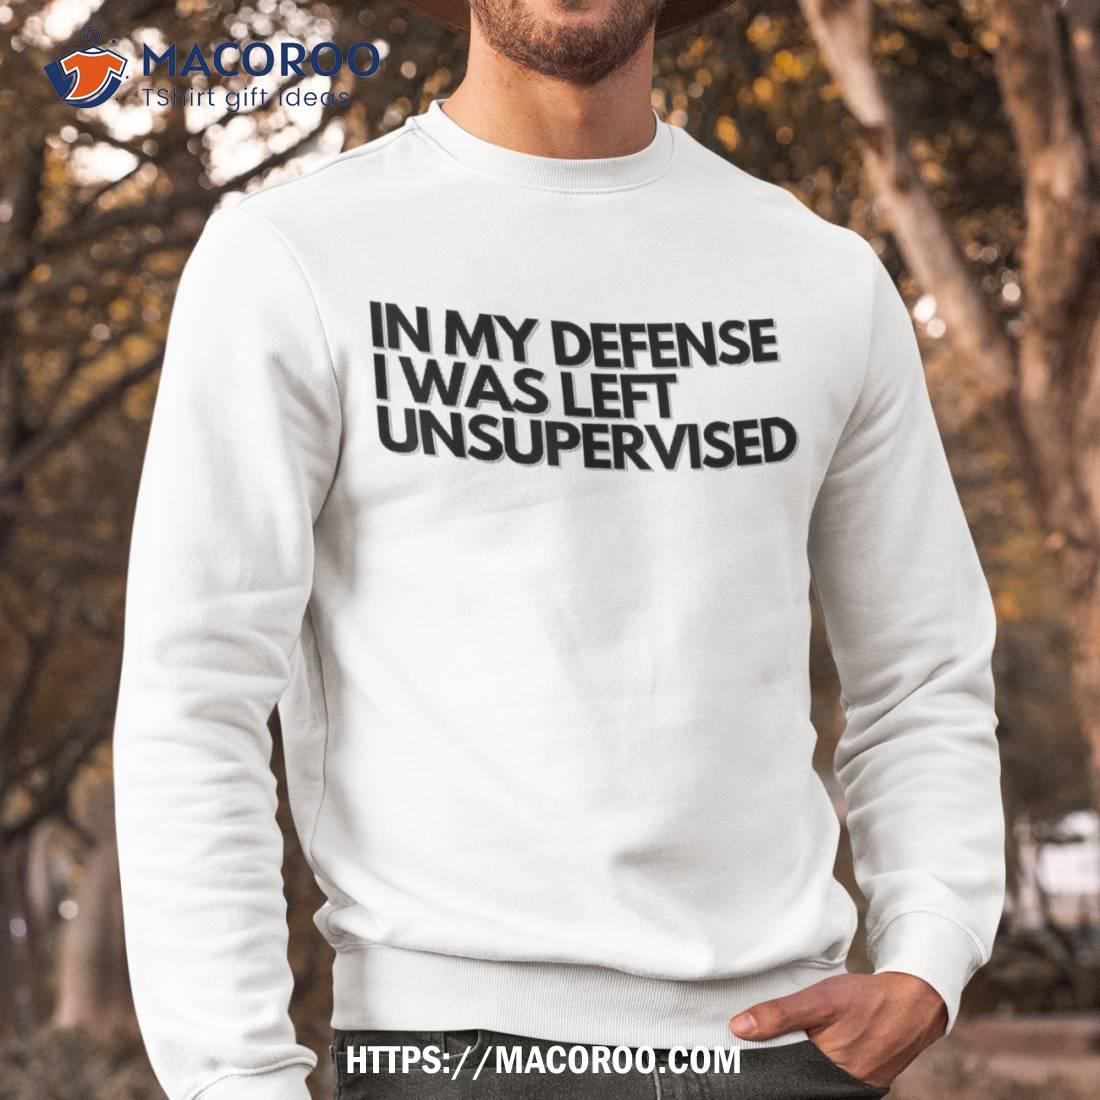 https://images.macoroo.com/wp-content/uploads/2023/08/in-my-defense-i-was-left-unsupervised-t-shirt-cool-funny-small-gifts-for-dad-sweatshirt.jpg